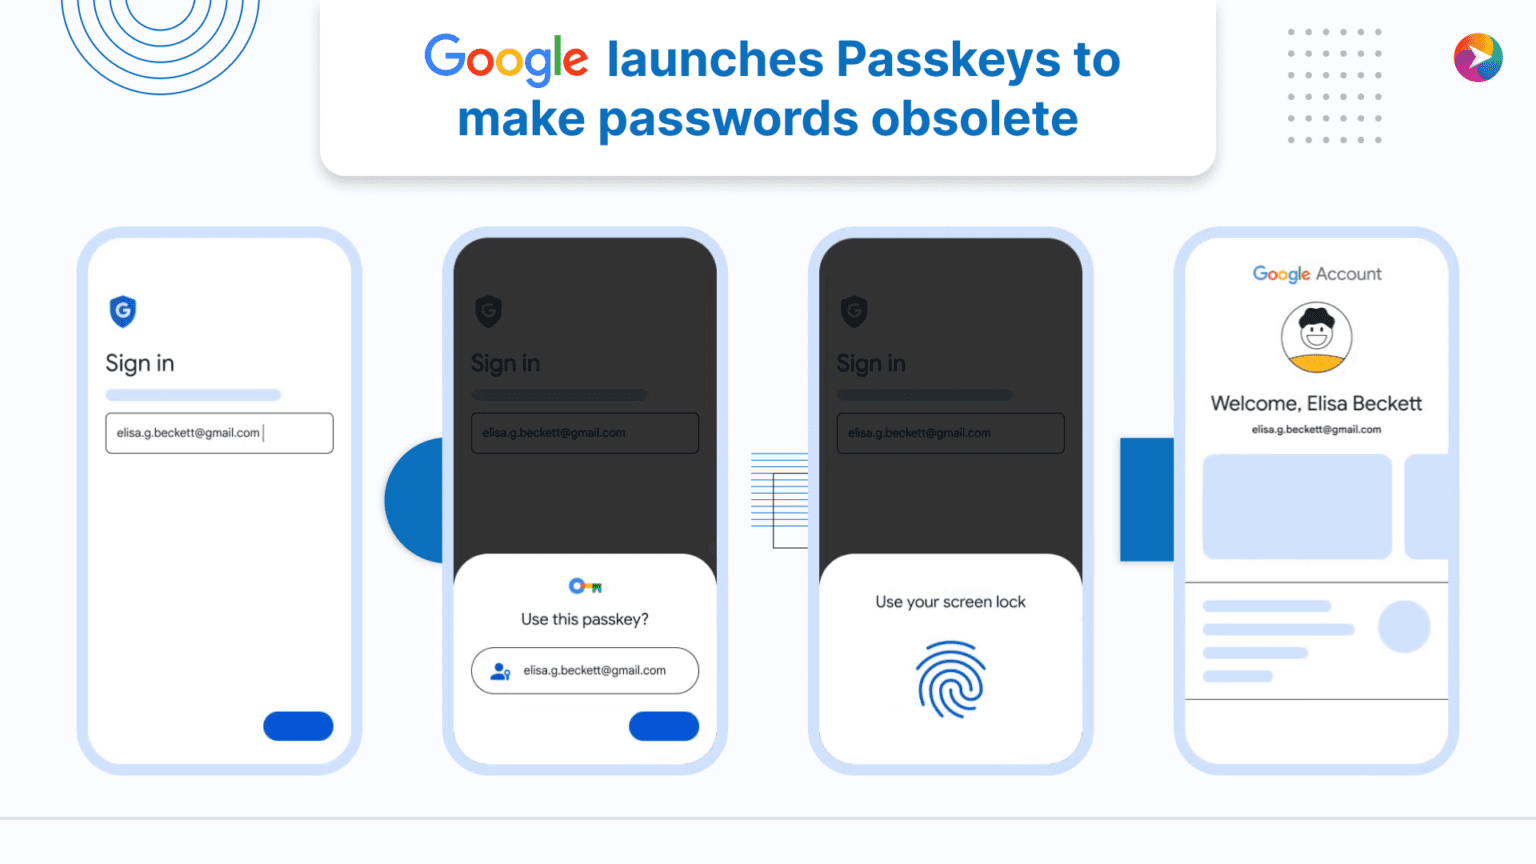 Google launches Passkeys to make passwords obsolete